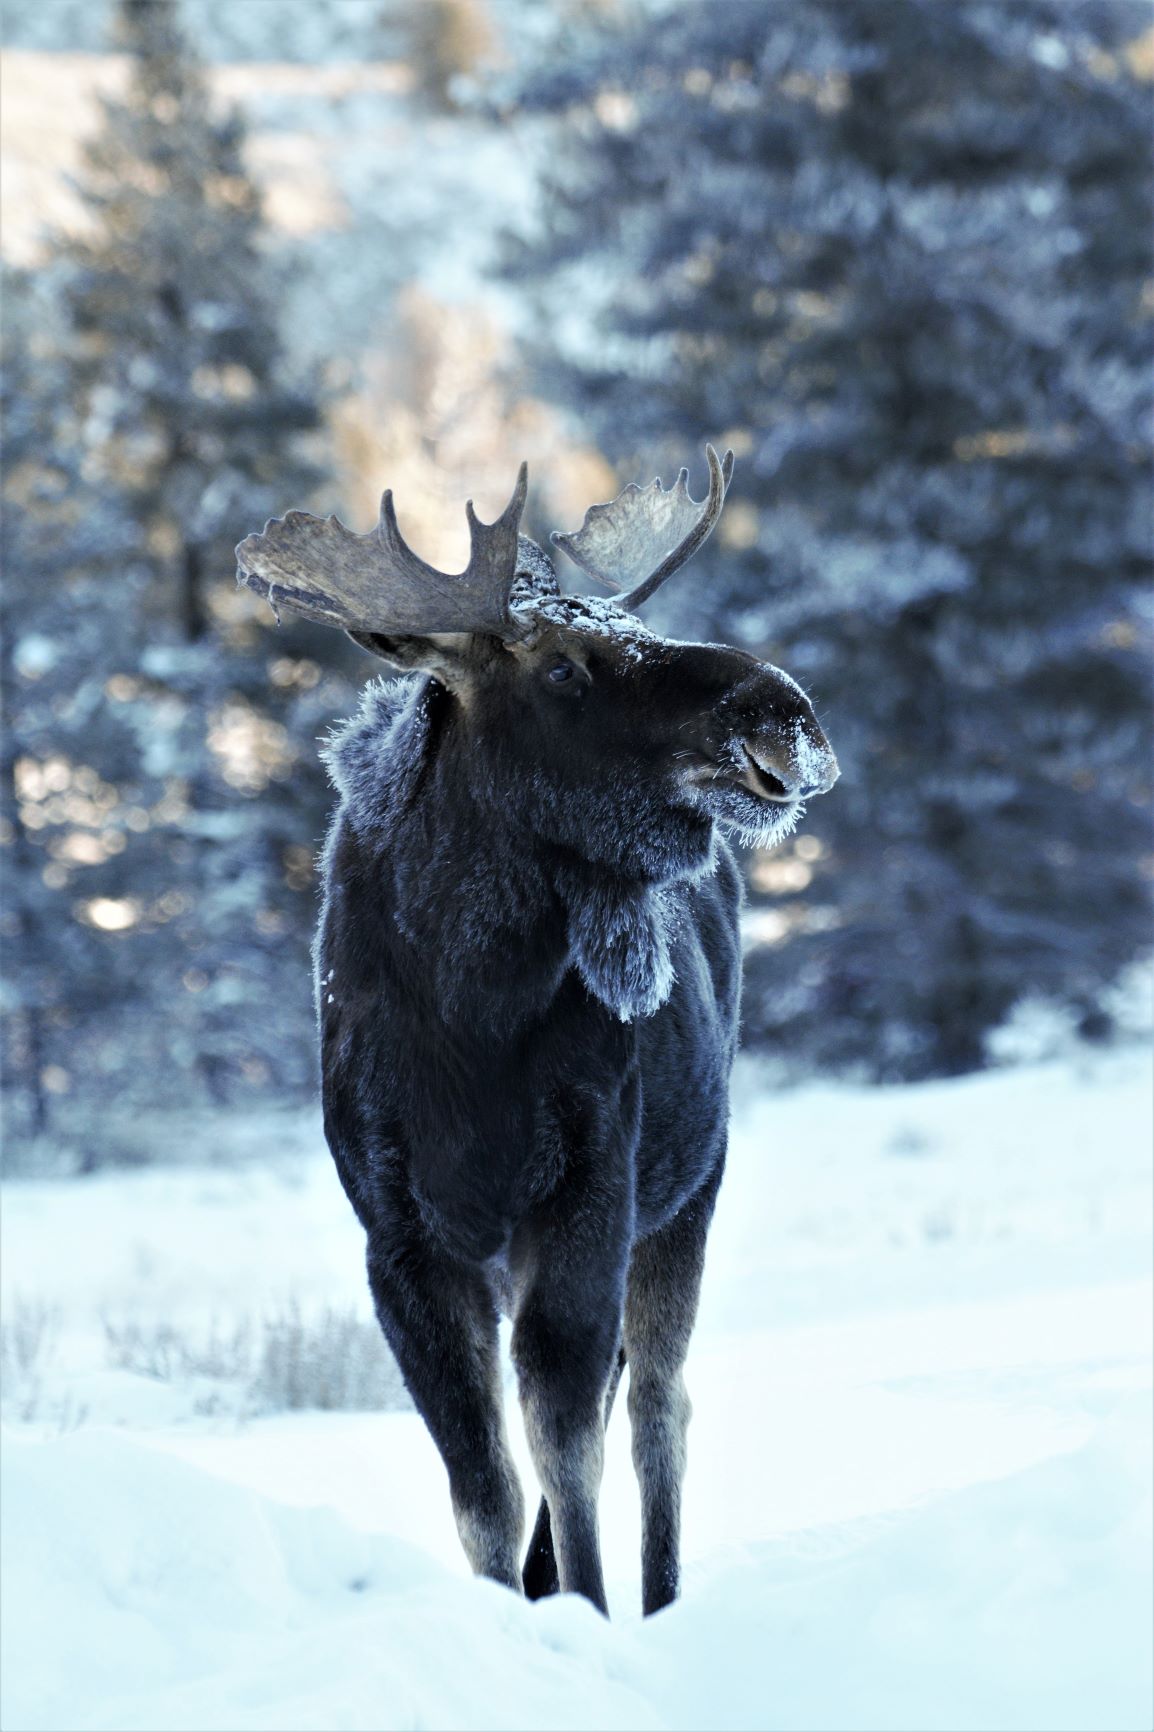 The Taylor Fork is full of wildlife. In the winter, moose are the most frequent visitor.